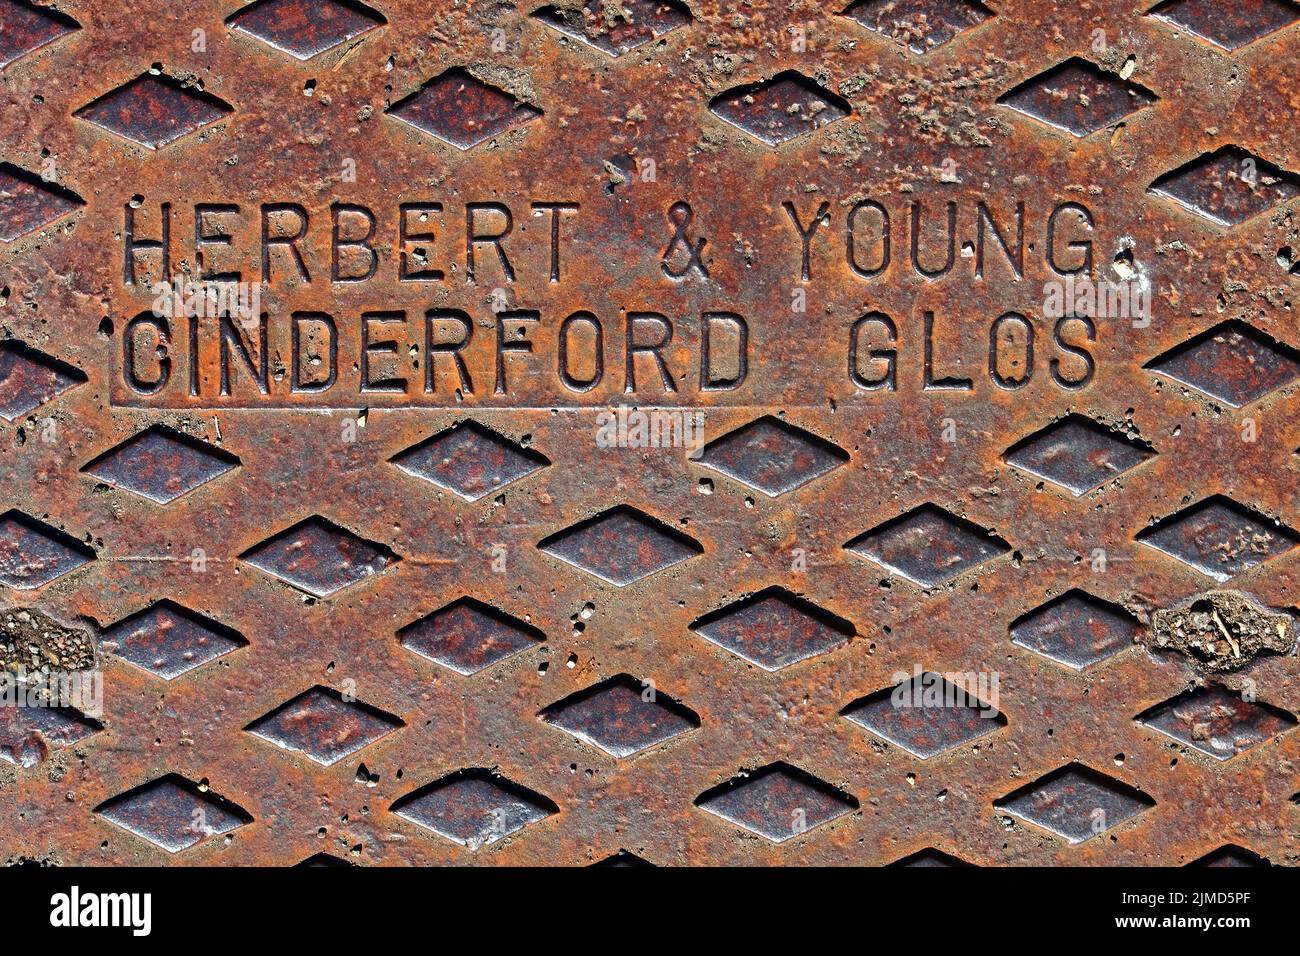 Herbert and Young Cinderford Glos Grid, Stroud, Gloucestershire, Inghilterra, Regno Unito, GL5 Foto Stock